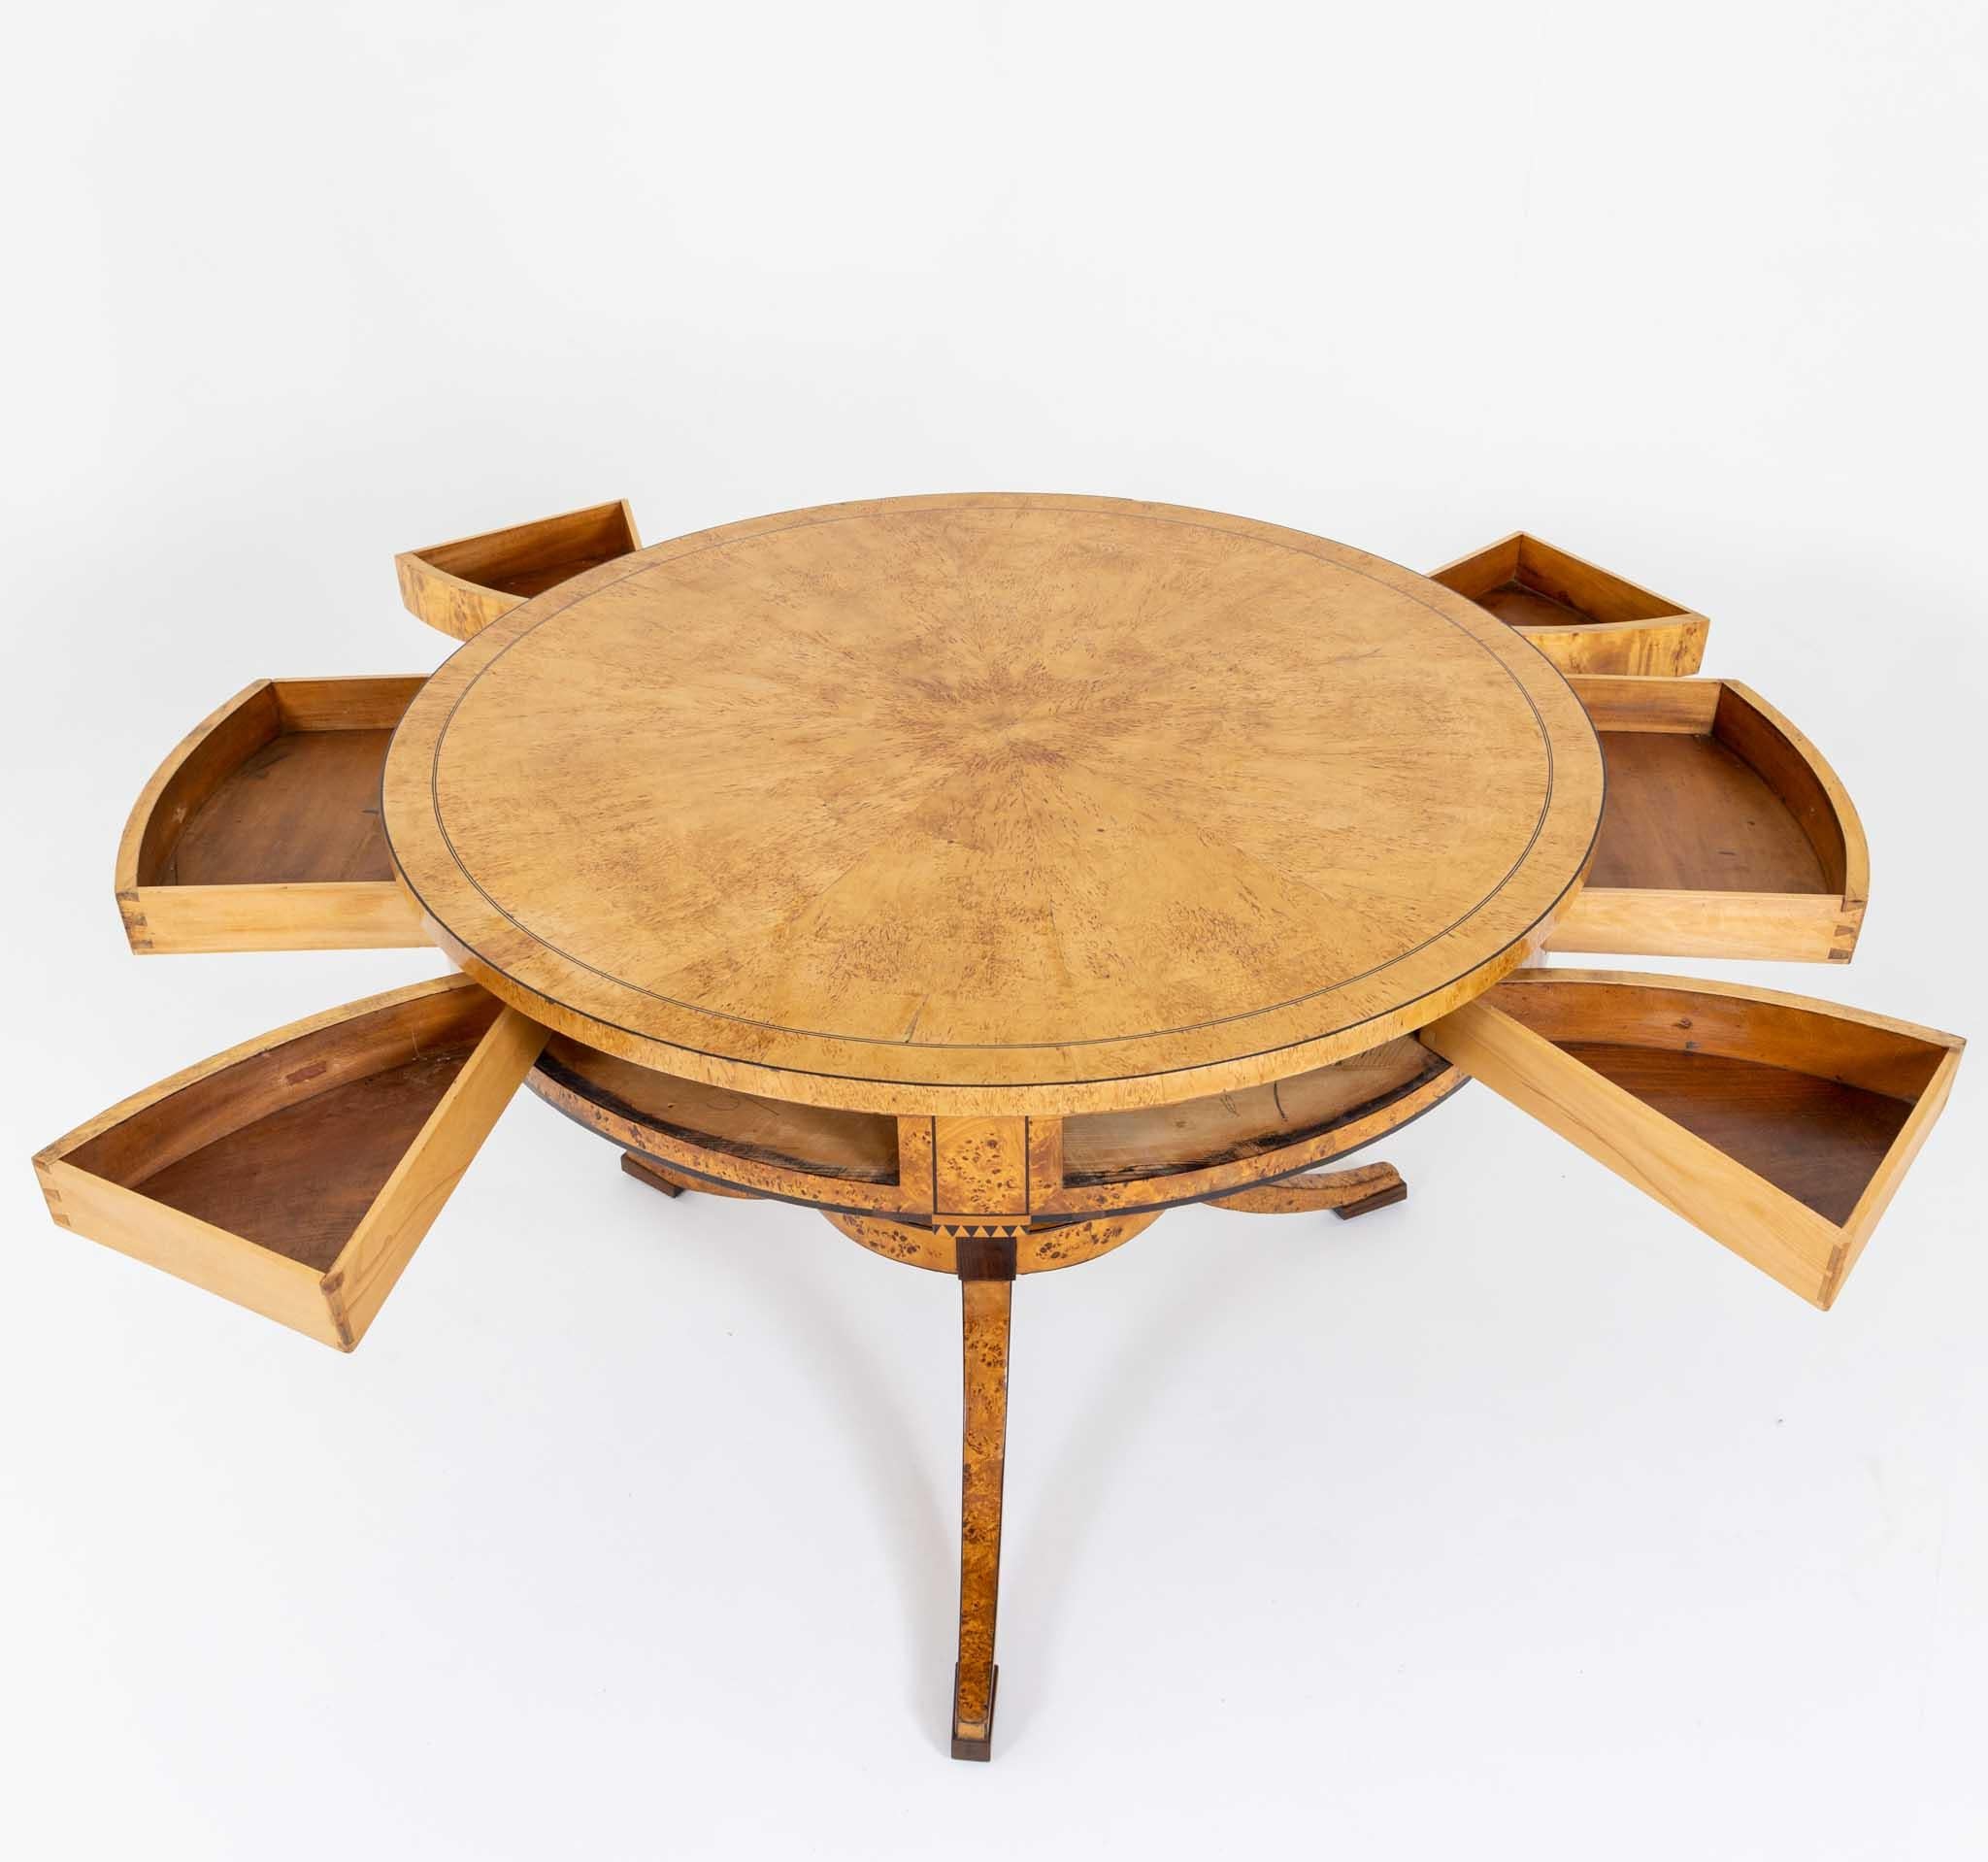 Biedermeier Game Table in Birch, Baltic States, early 19th Century For Sale 1